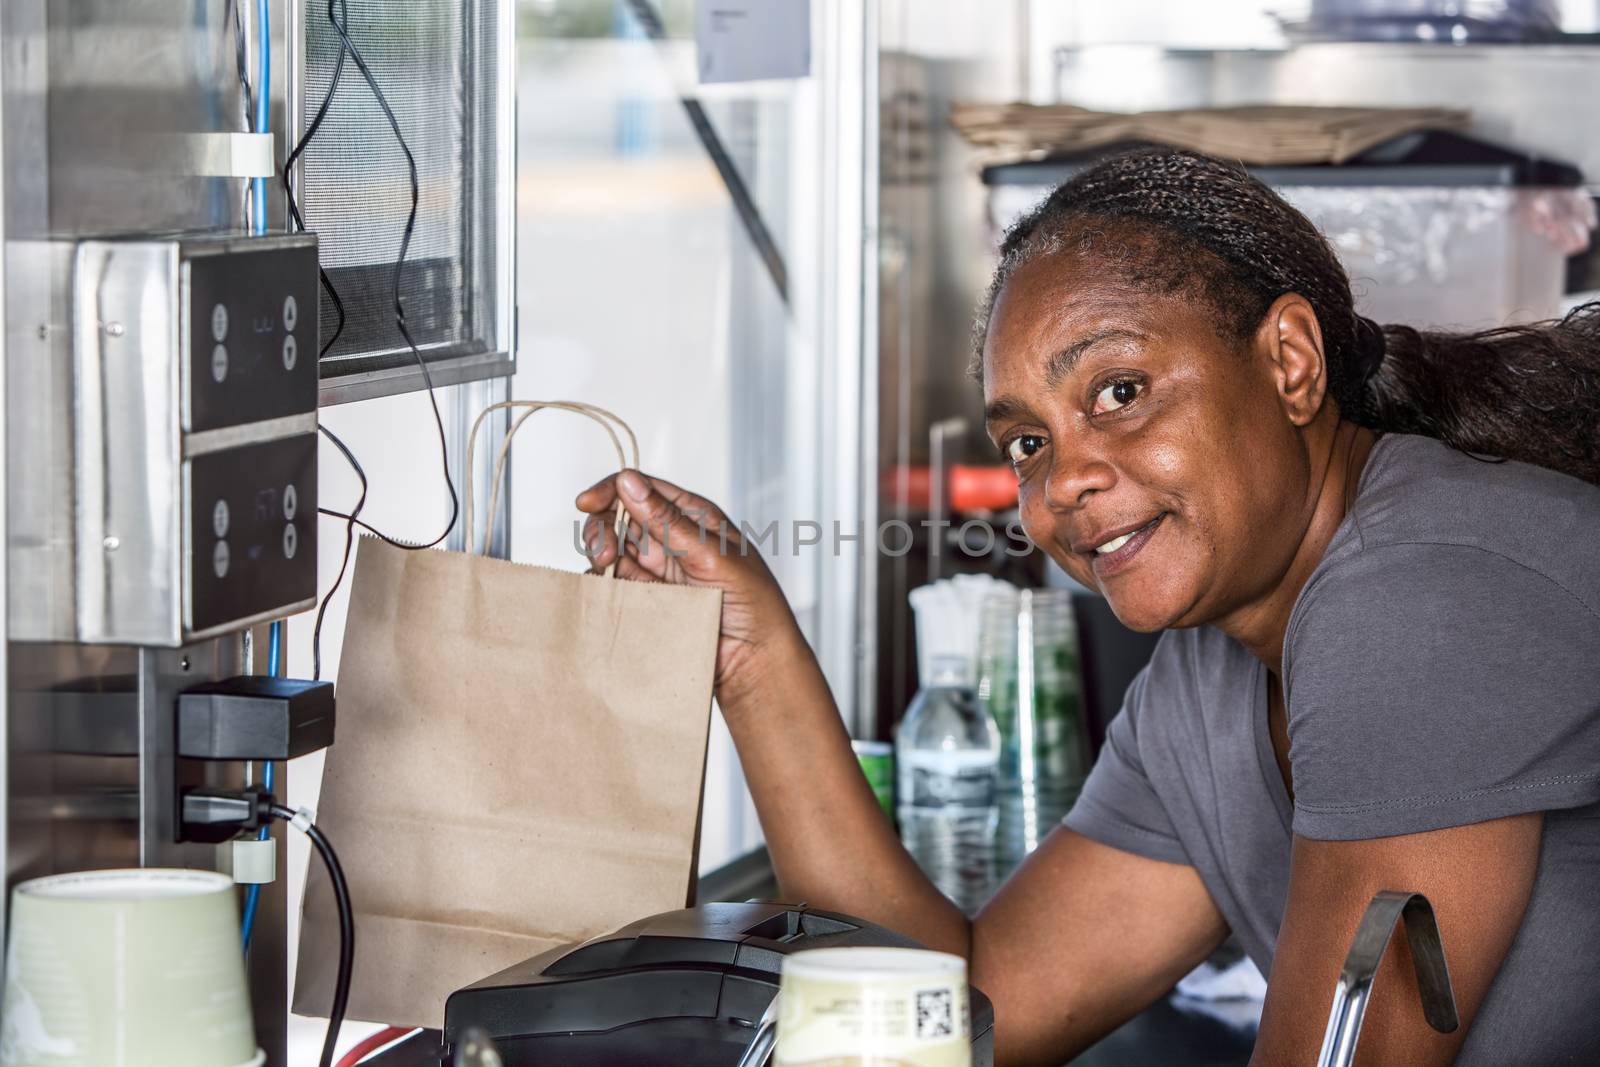 Smiling African-American worker hands order out window of modern food truck